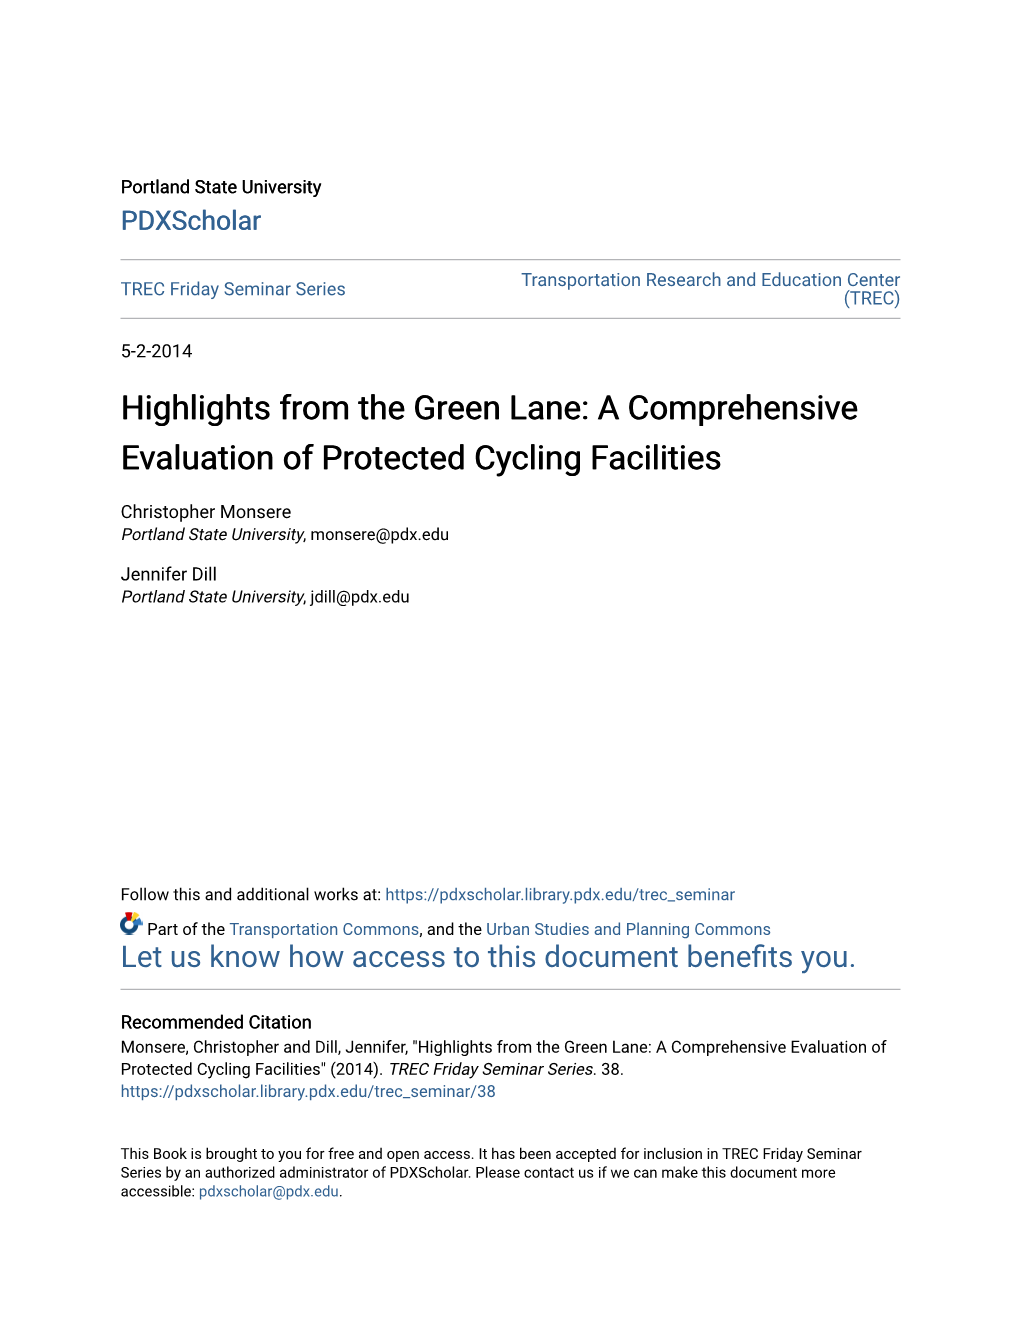 Highlights from the Green Lane: a Comprehensive Evaluation of Protected Cycling Facilities